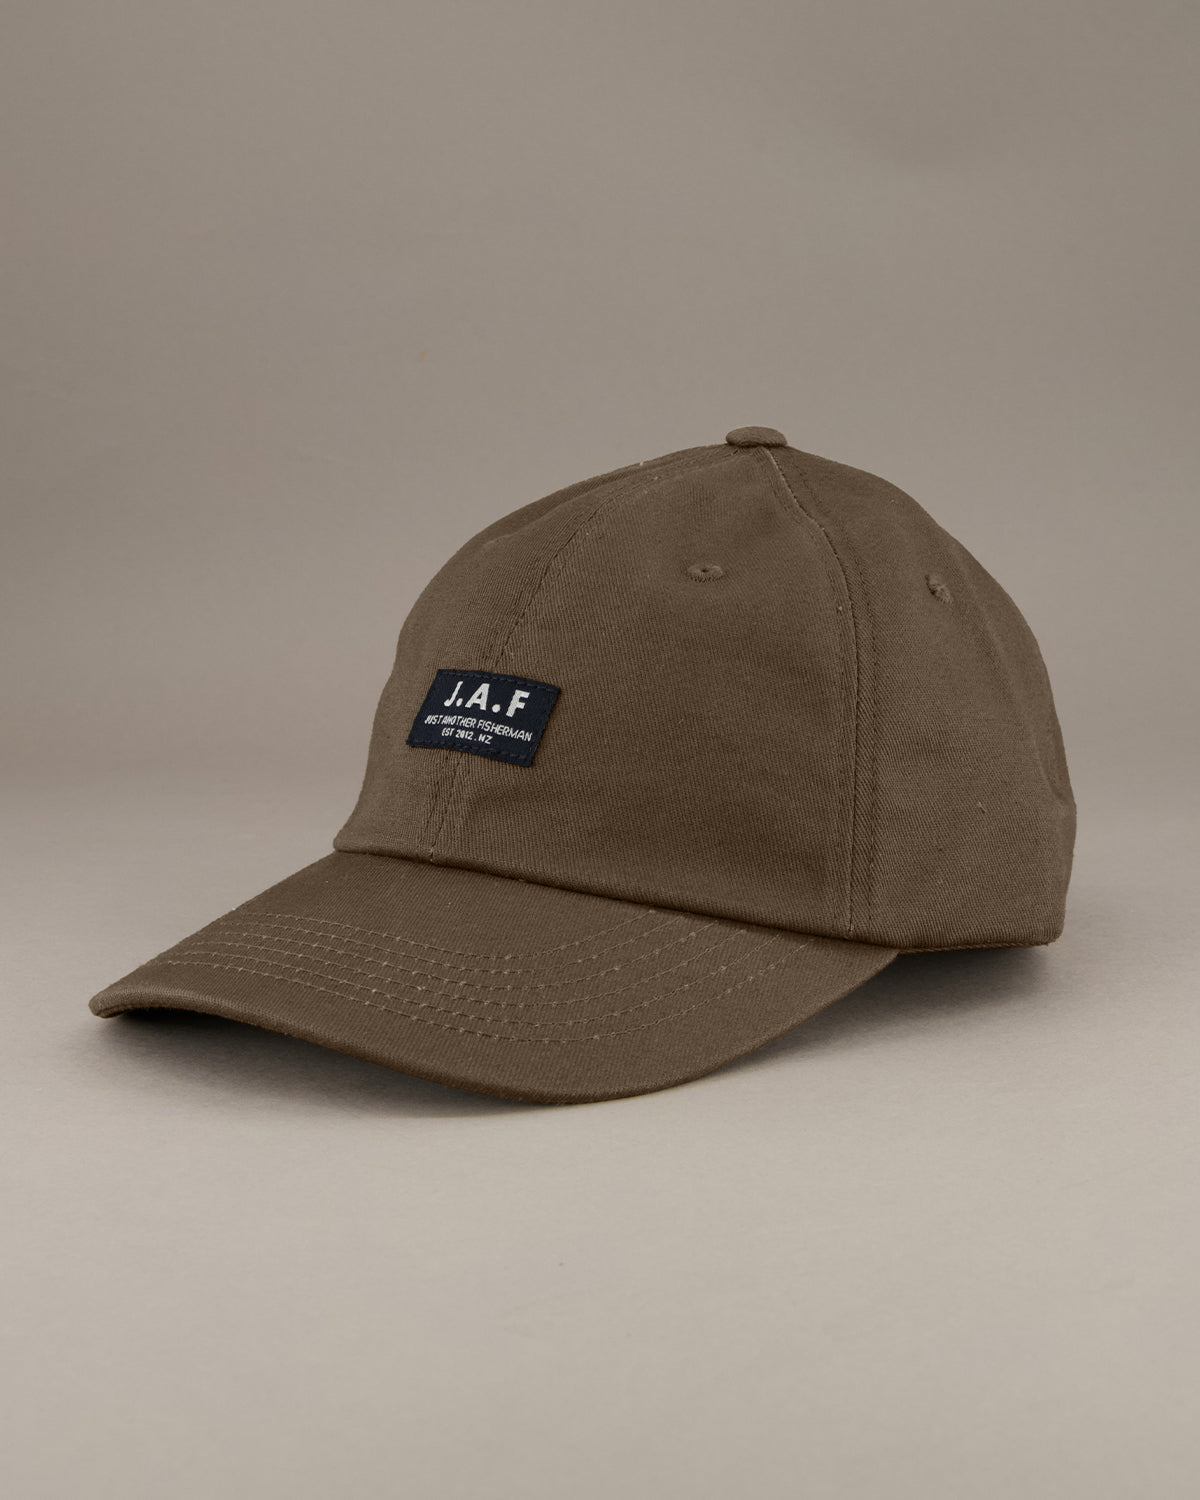 Just Another Fisherman J.A.F Cap - Grey